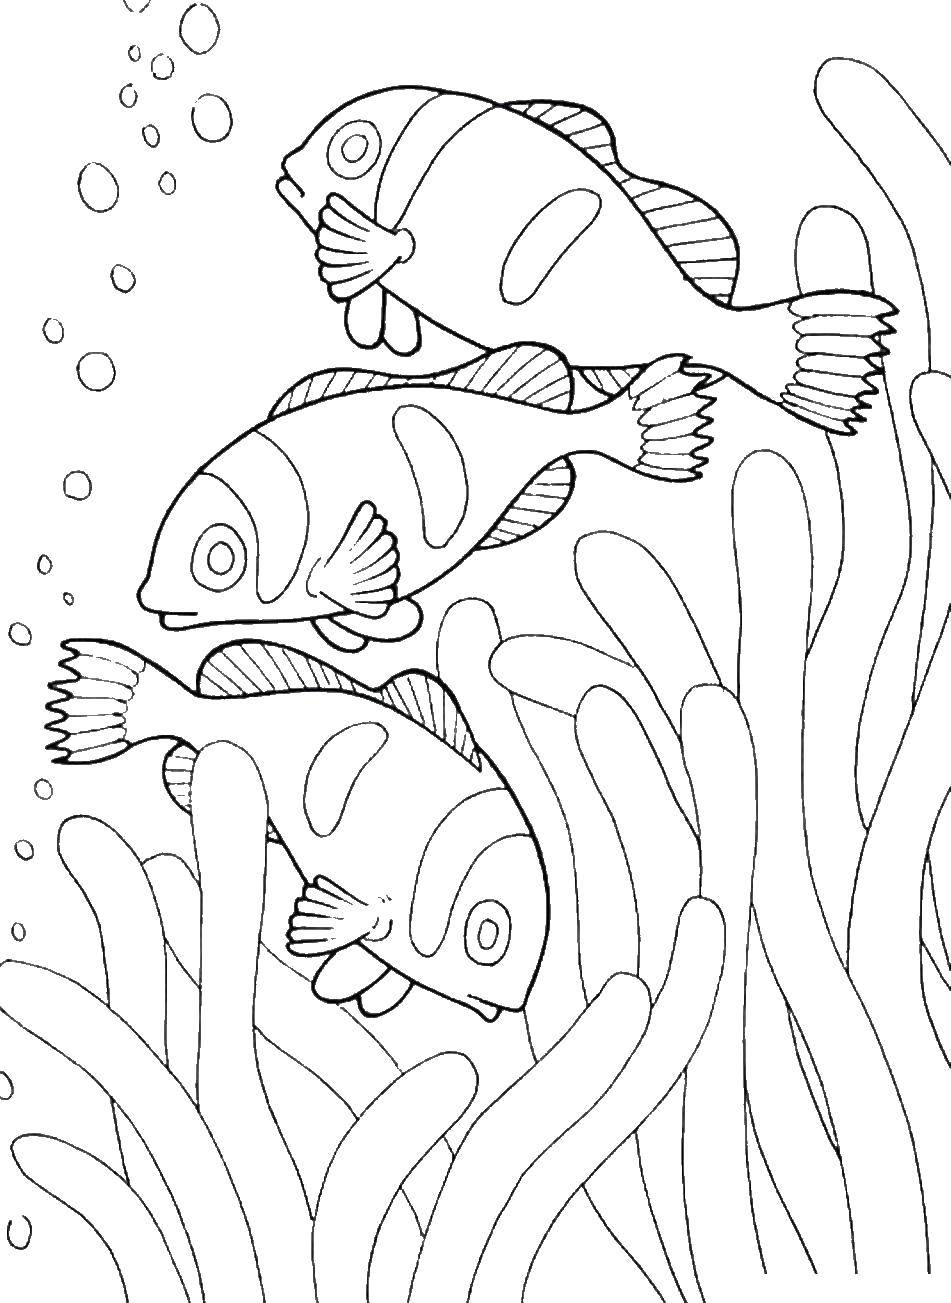 Coloring Fish among corals and algae. Category Marine animals. Tags:  Underwater world, fish.